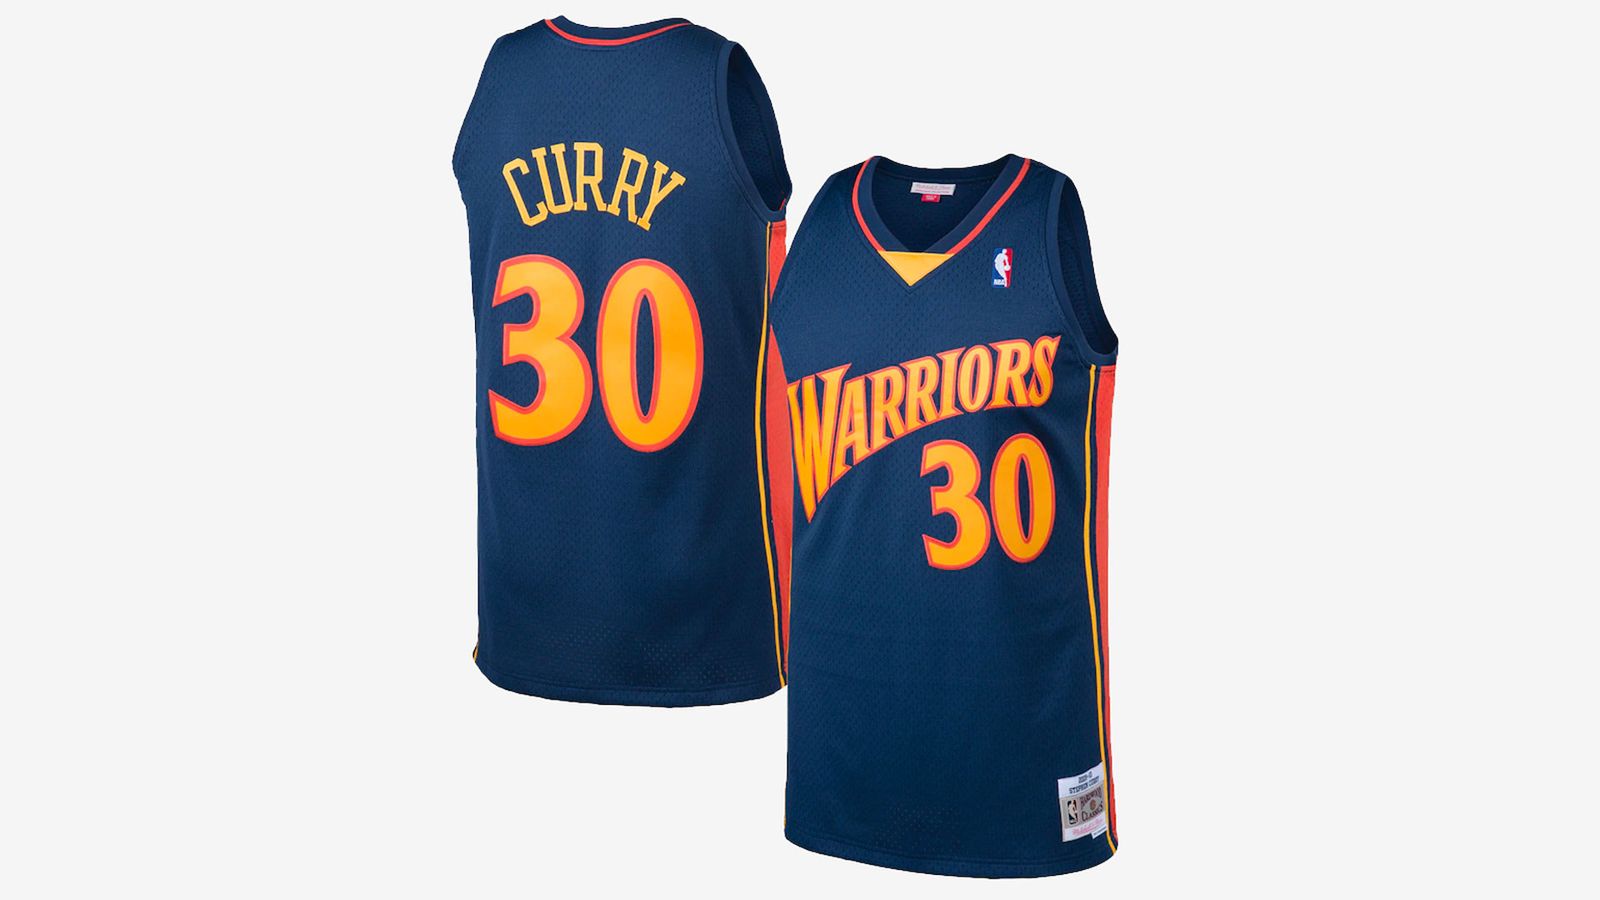 Stephen Curry Golden State Warriors 2009 Hardwood Classics Road Swingman Jersey product image of a navy sleeveless uniform with orange and red details.